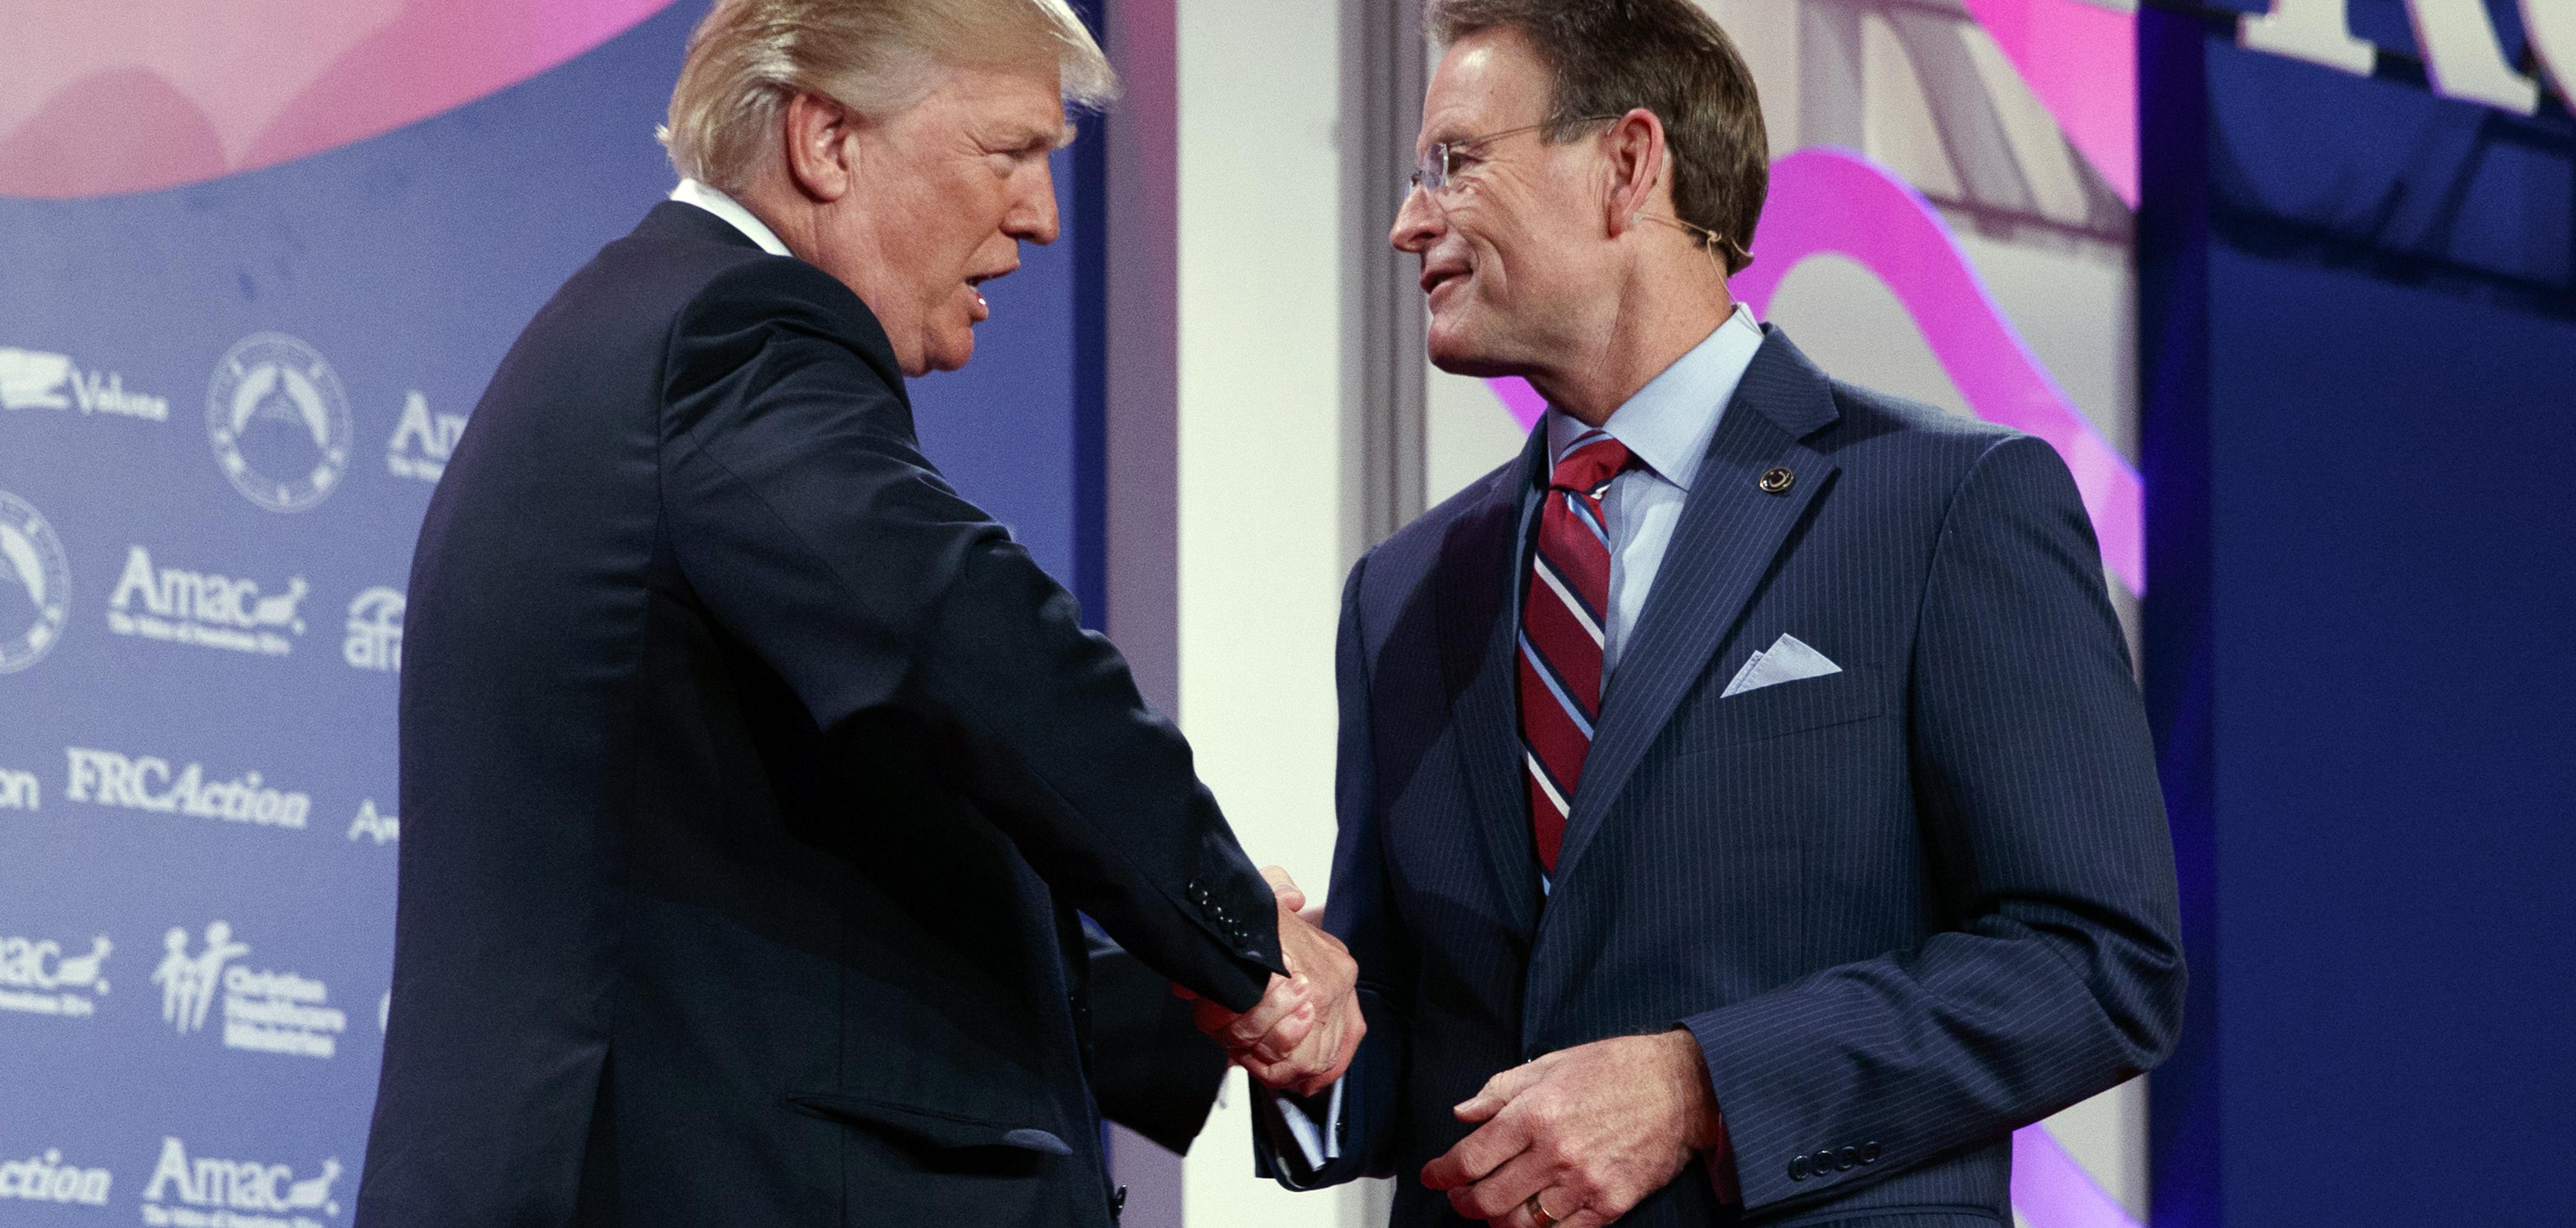  Donald Trump shakes hands with Family Research Council president Tony Perkins at the 2017 Value Voters Summit, Friday, Oct. 13, 2017, in Washington. 